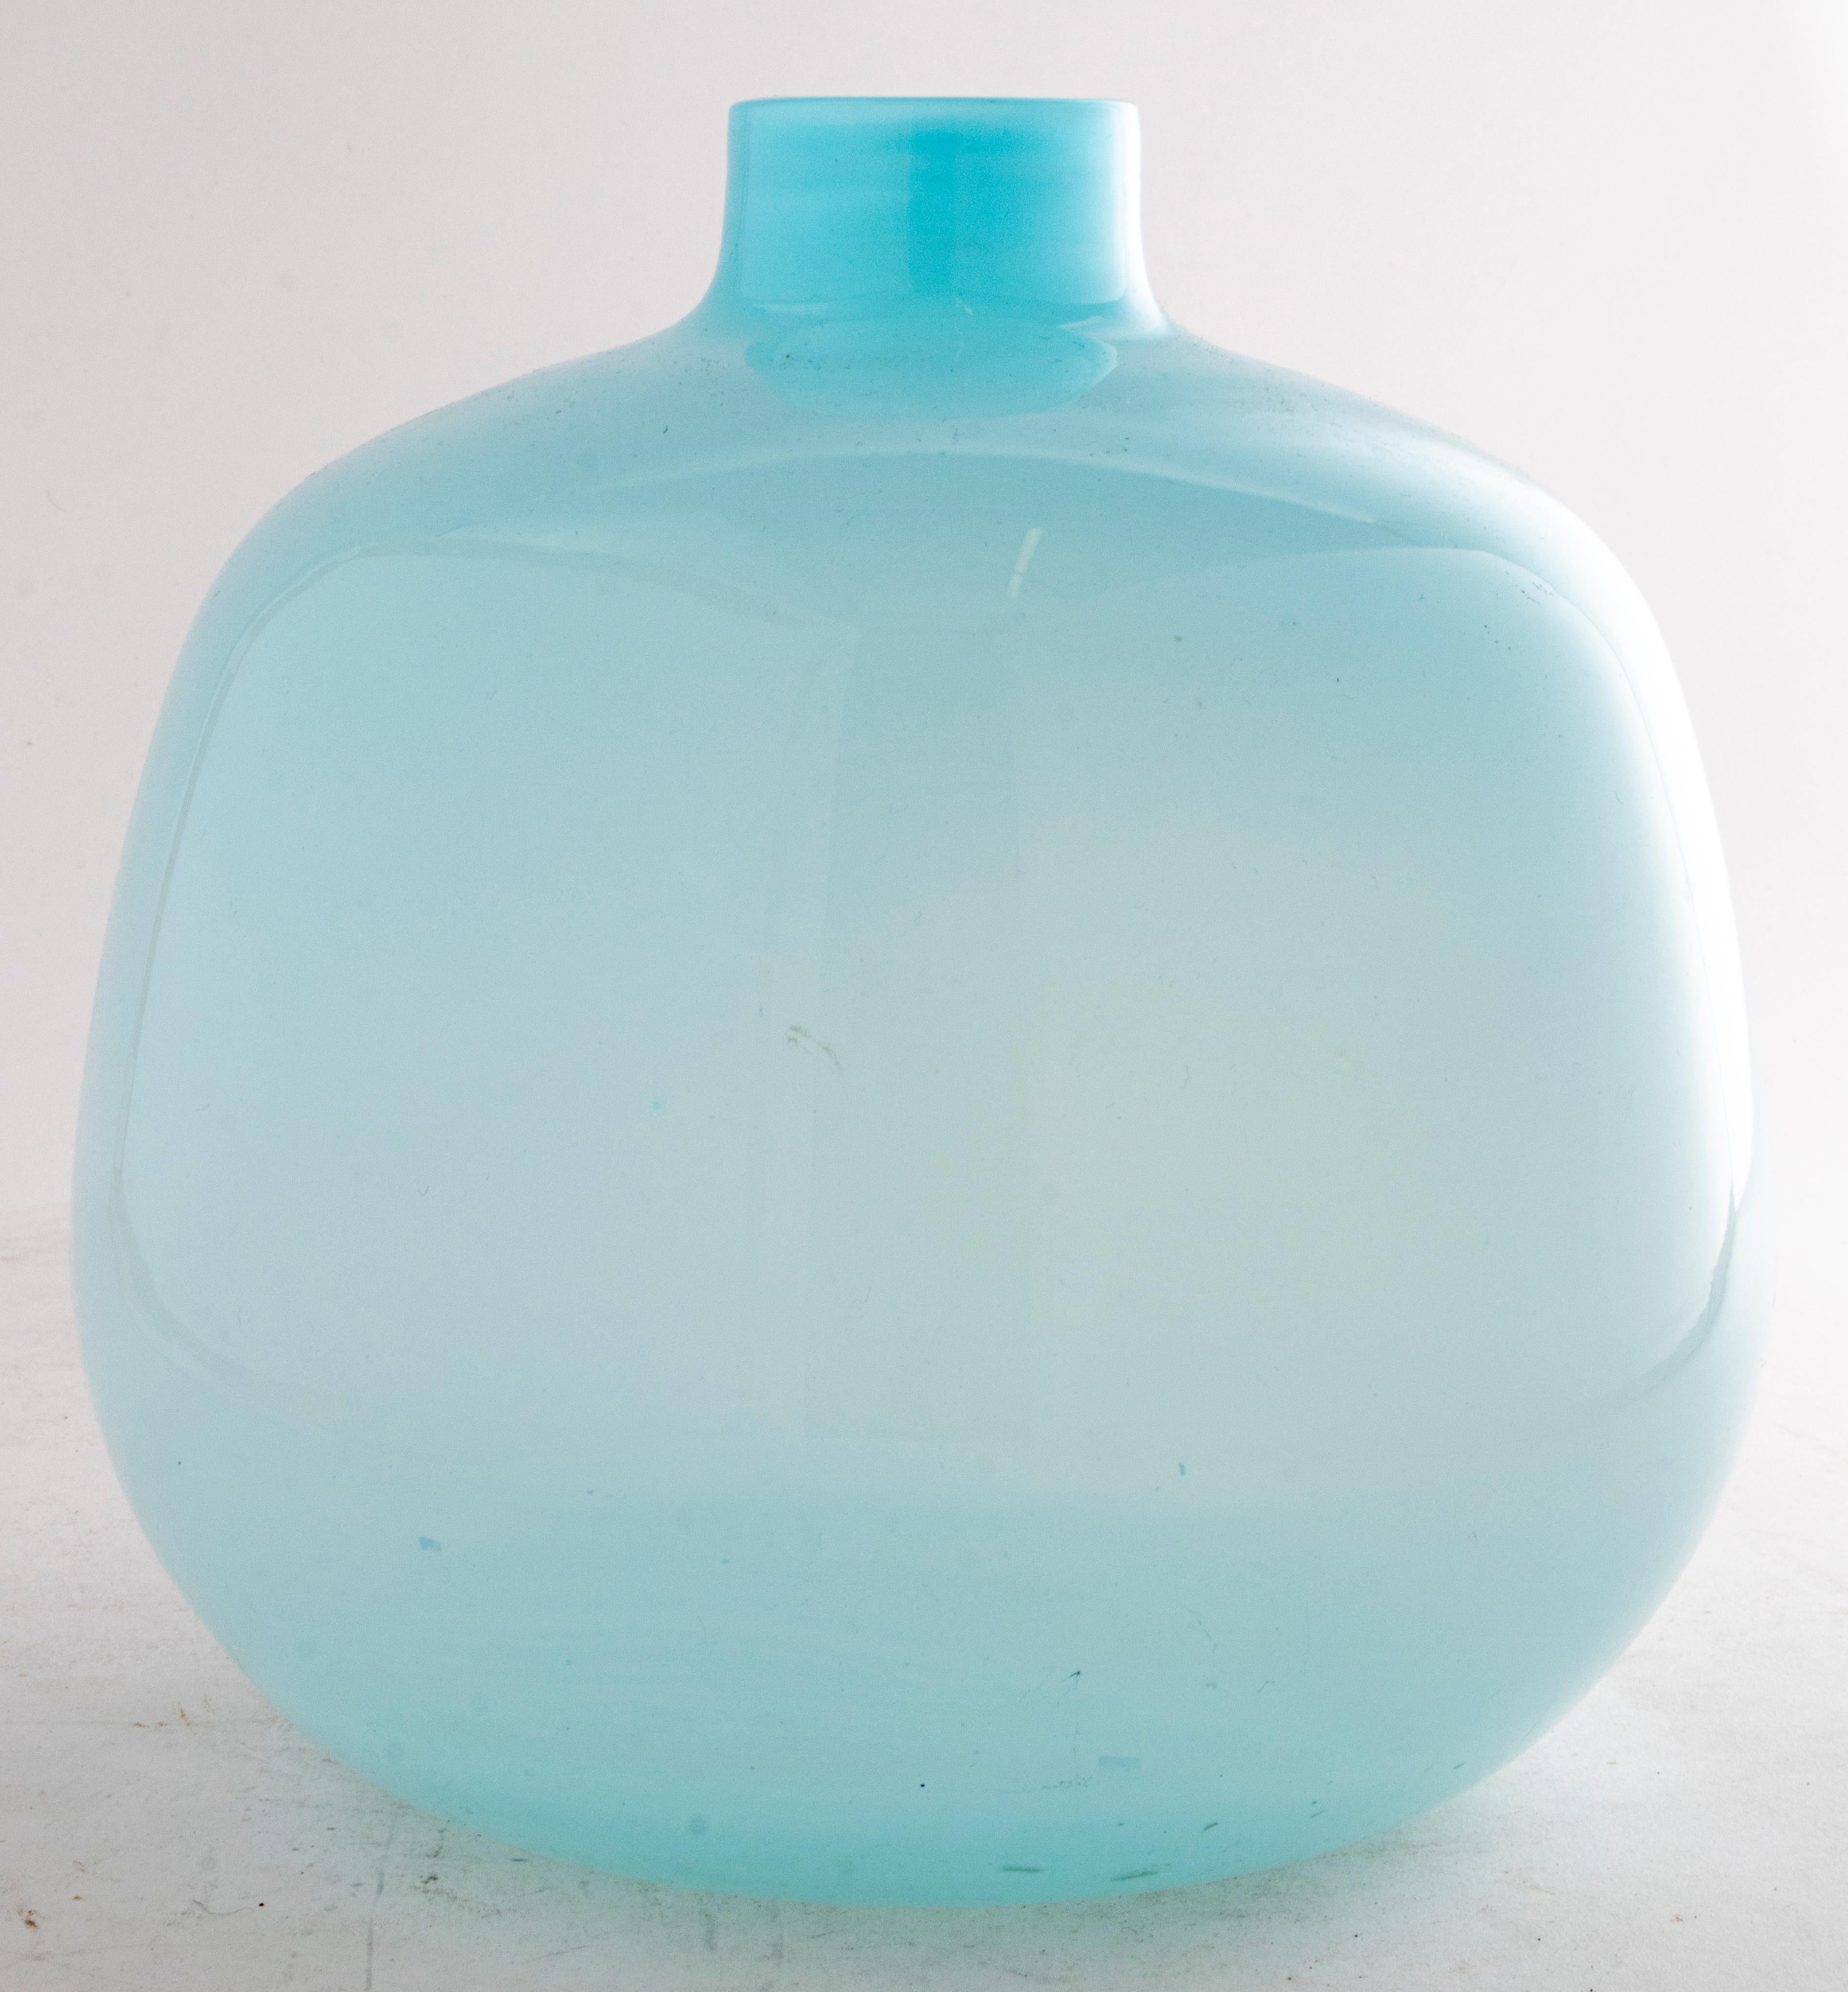 Modern glass vase in pale blue glass with short bottle neck, unmarked. 

Dimensions: 8